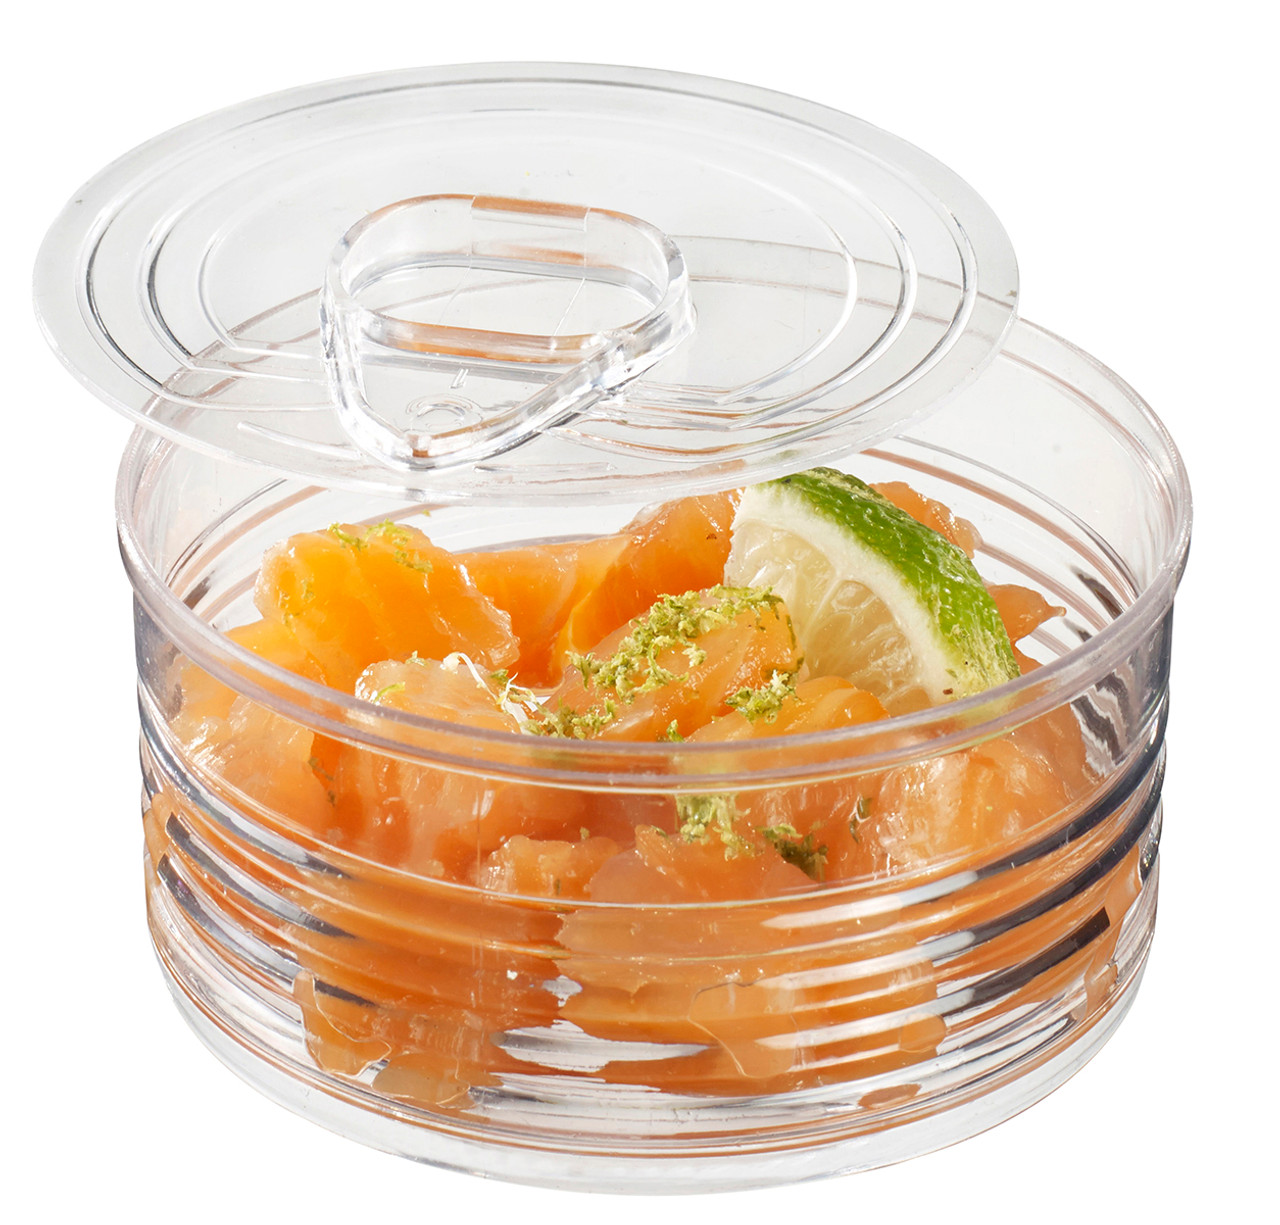 Tin can Transparent with lid 100ml / 3.4oz - Solia USA